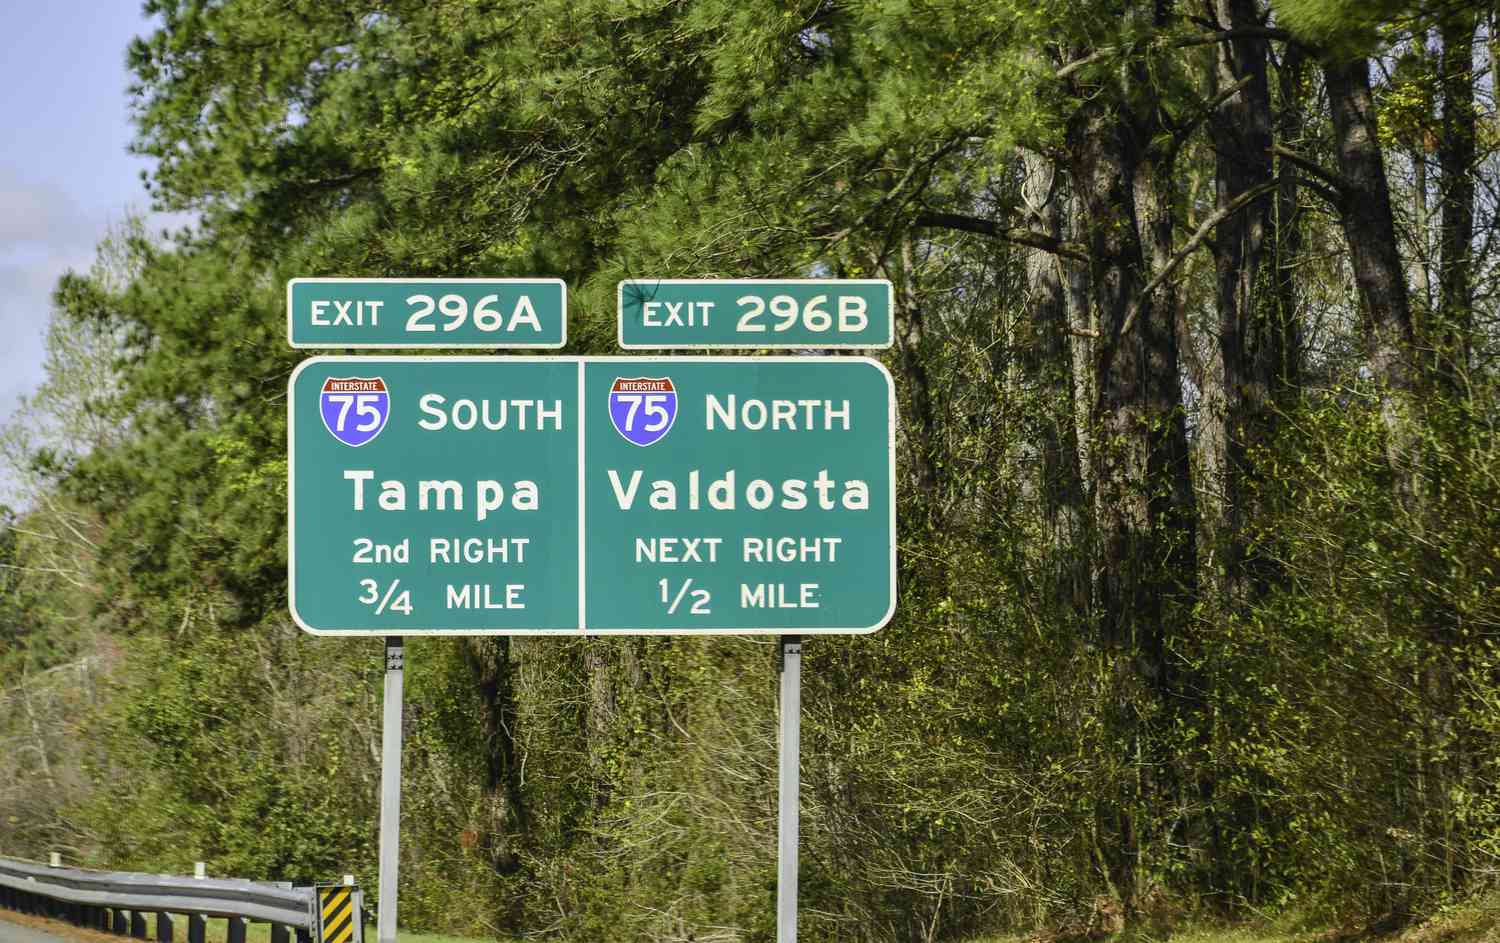 11-facts-about-environmental-initiatives-and-sustainability-in-valdosta-georgia